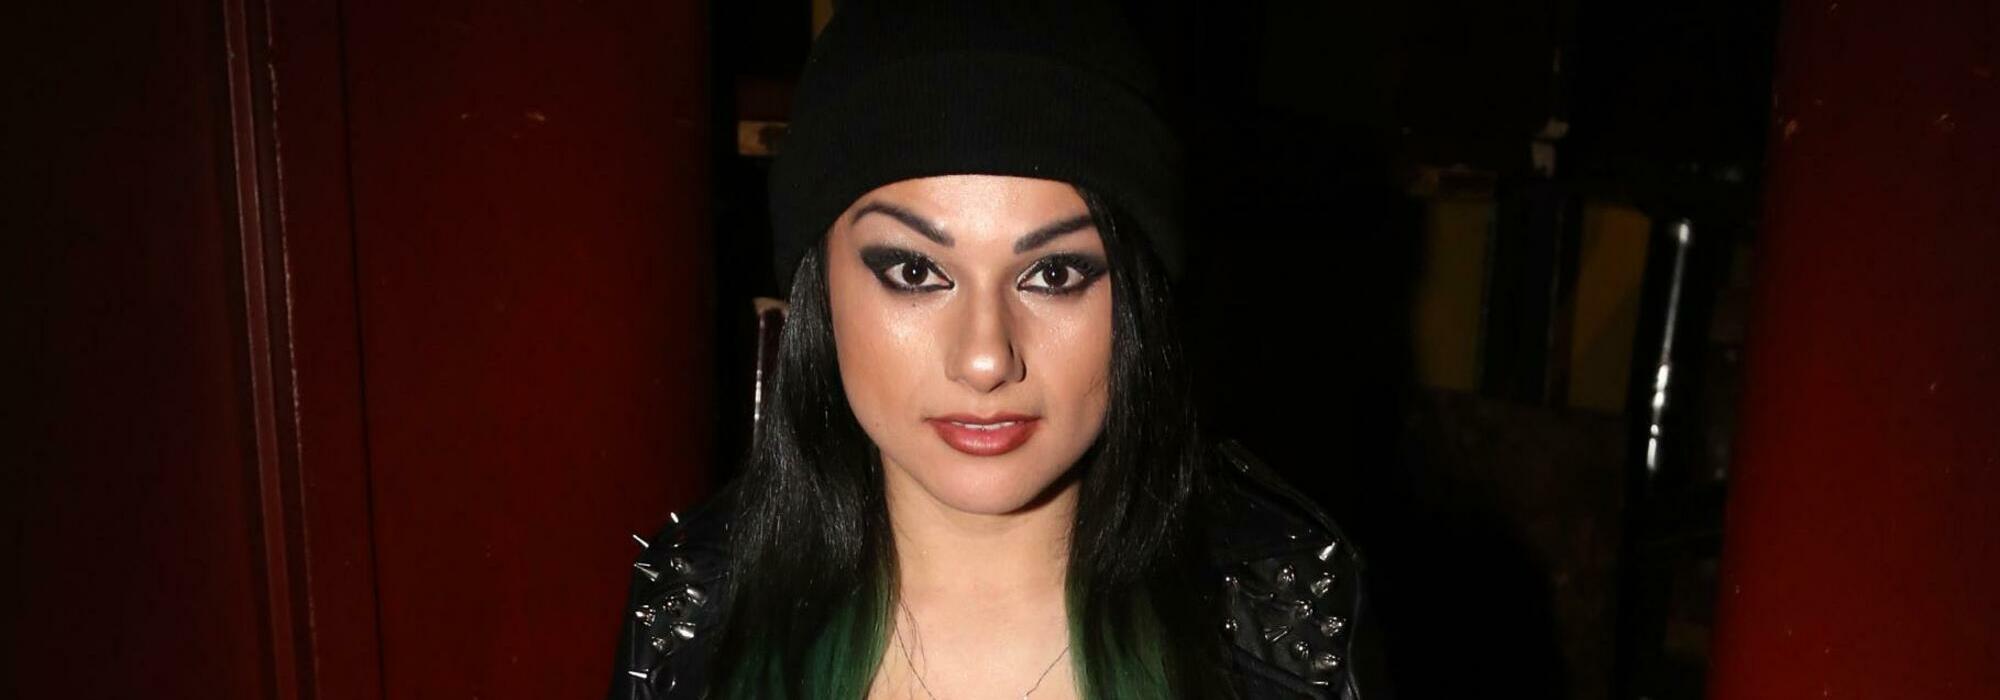 A Snow Tha Product live event